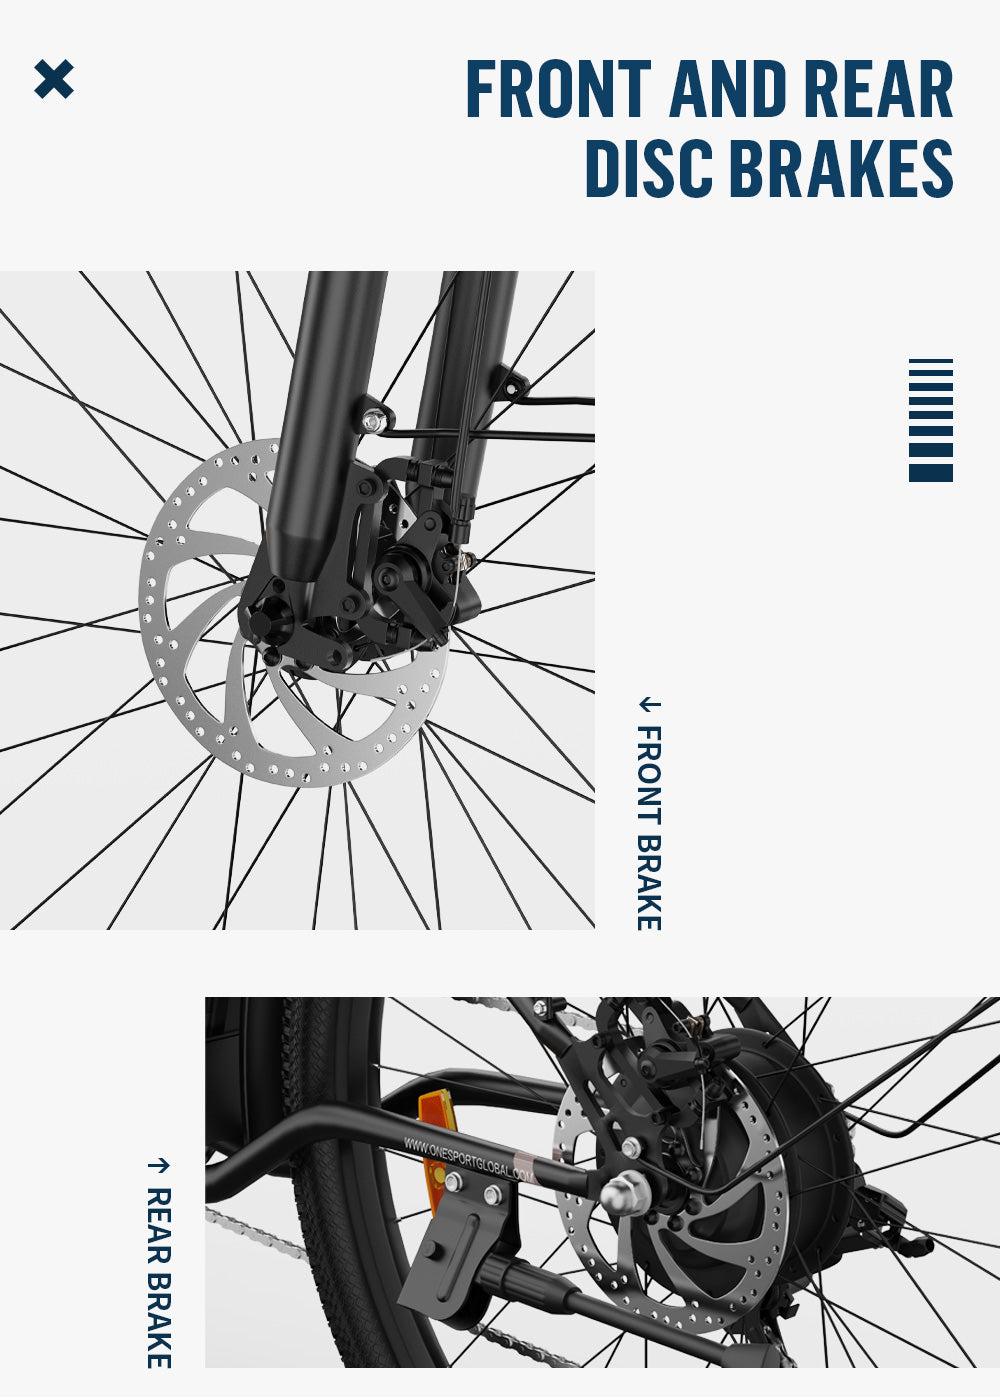 OneSport OT18-3 step-through ebike front and rear disc brakes